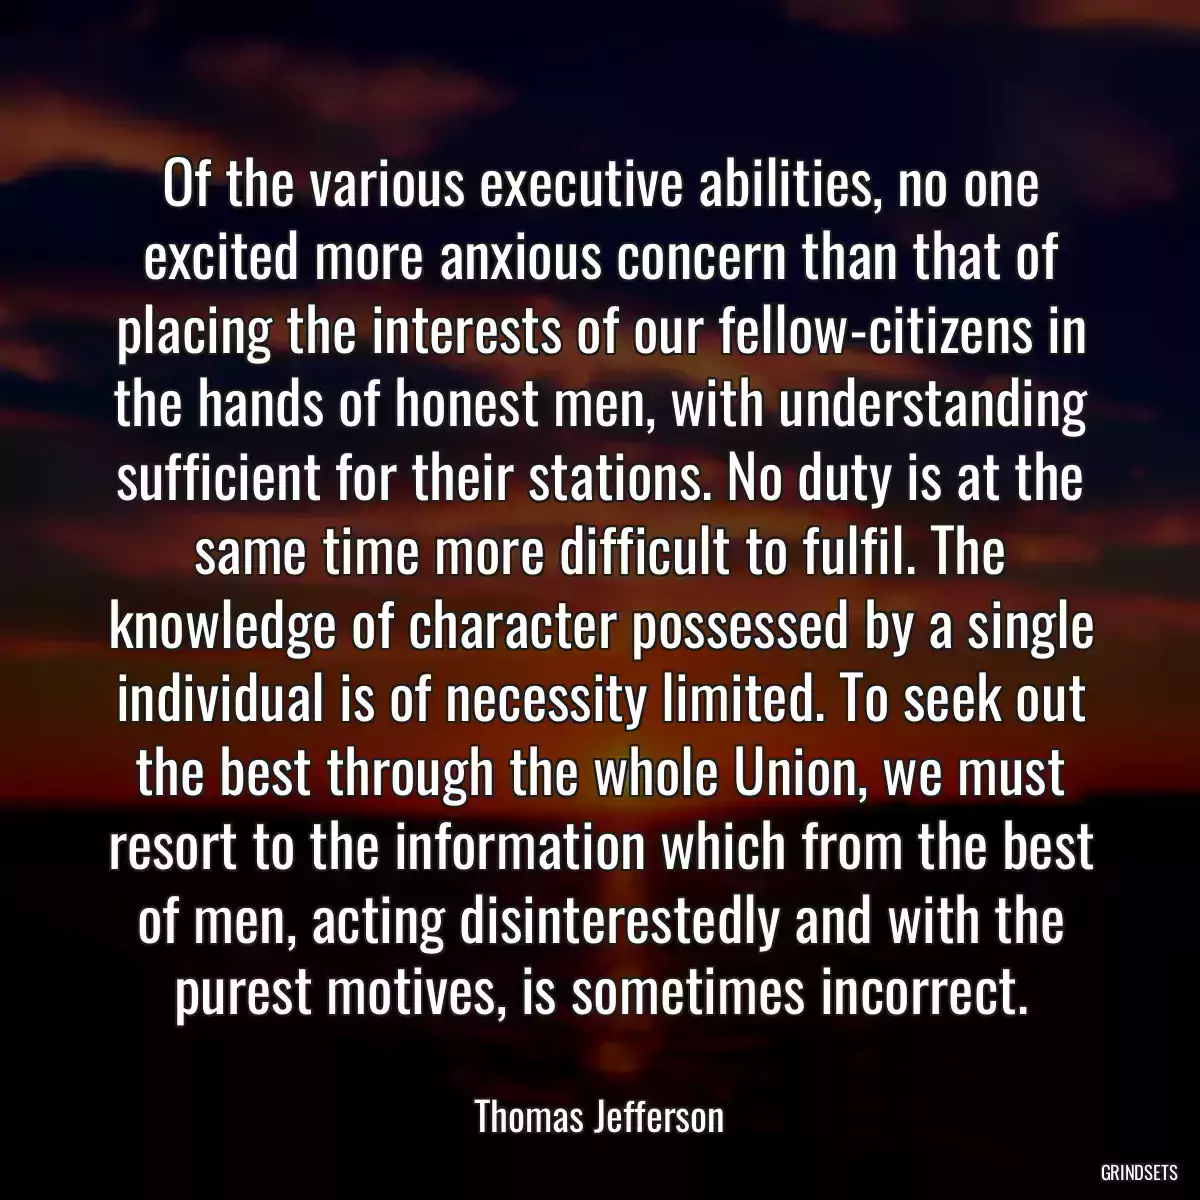 Of the various executive abilities, no one excited more anxious concern than that of placing the interests of our fellow-citizens in the hands of honest men, with understanding sufficient for their stations. No duty is at the same time more difficult to fulfil. The knowledge of character possessed by a single individual is of necessity limited. To seek out the best through the whole Union, we must resort to the information which from the best of men, acting disinterestedly and with the purest motives, is sometimes incorrect.